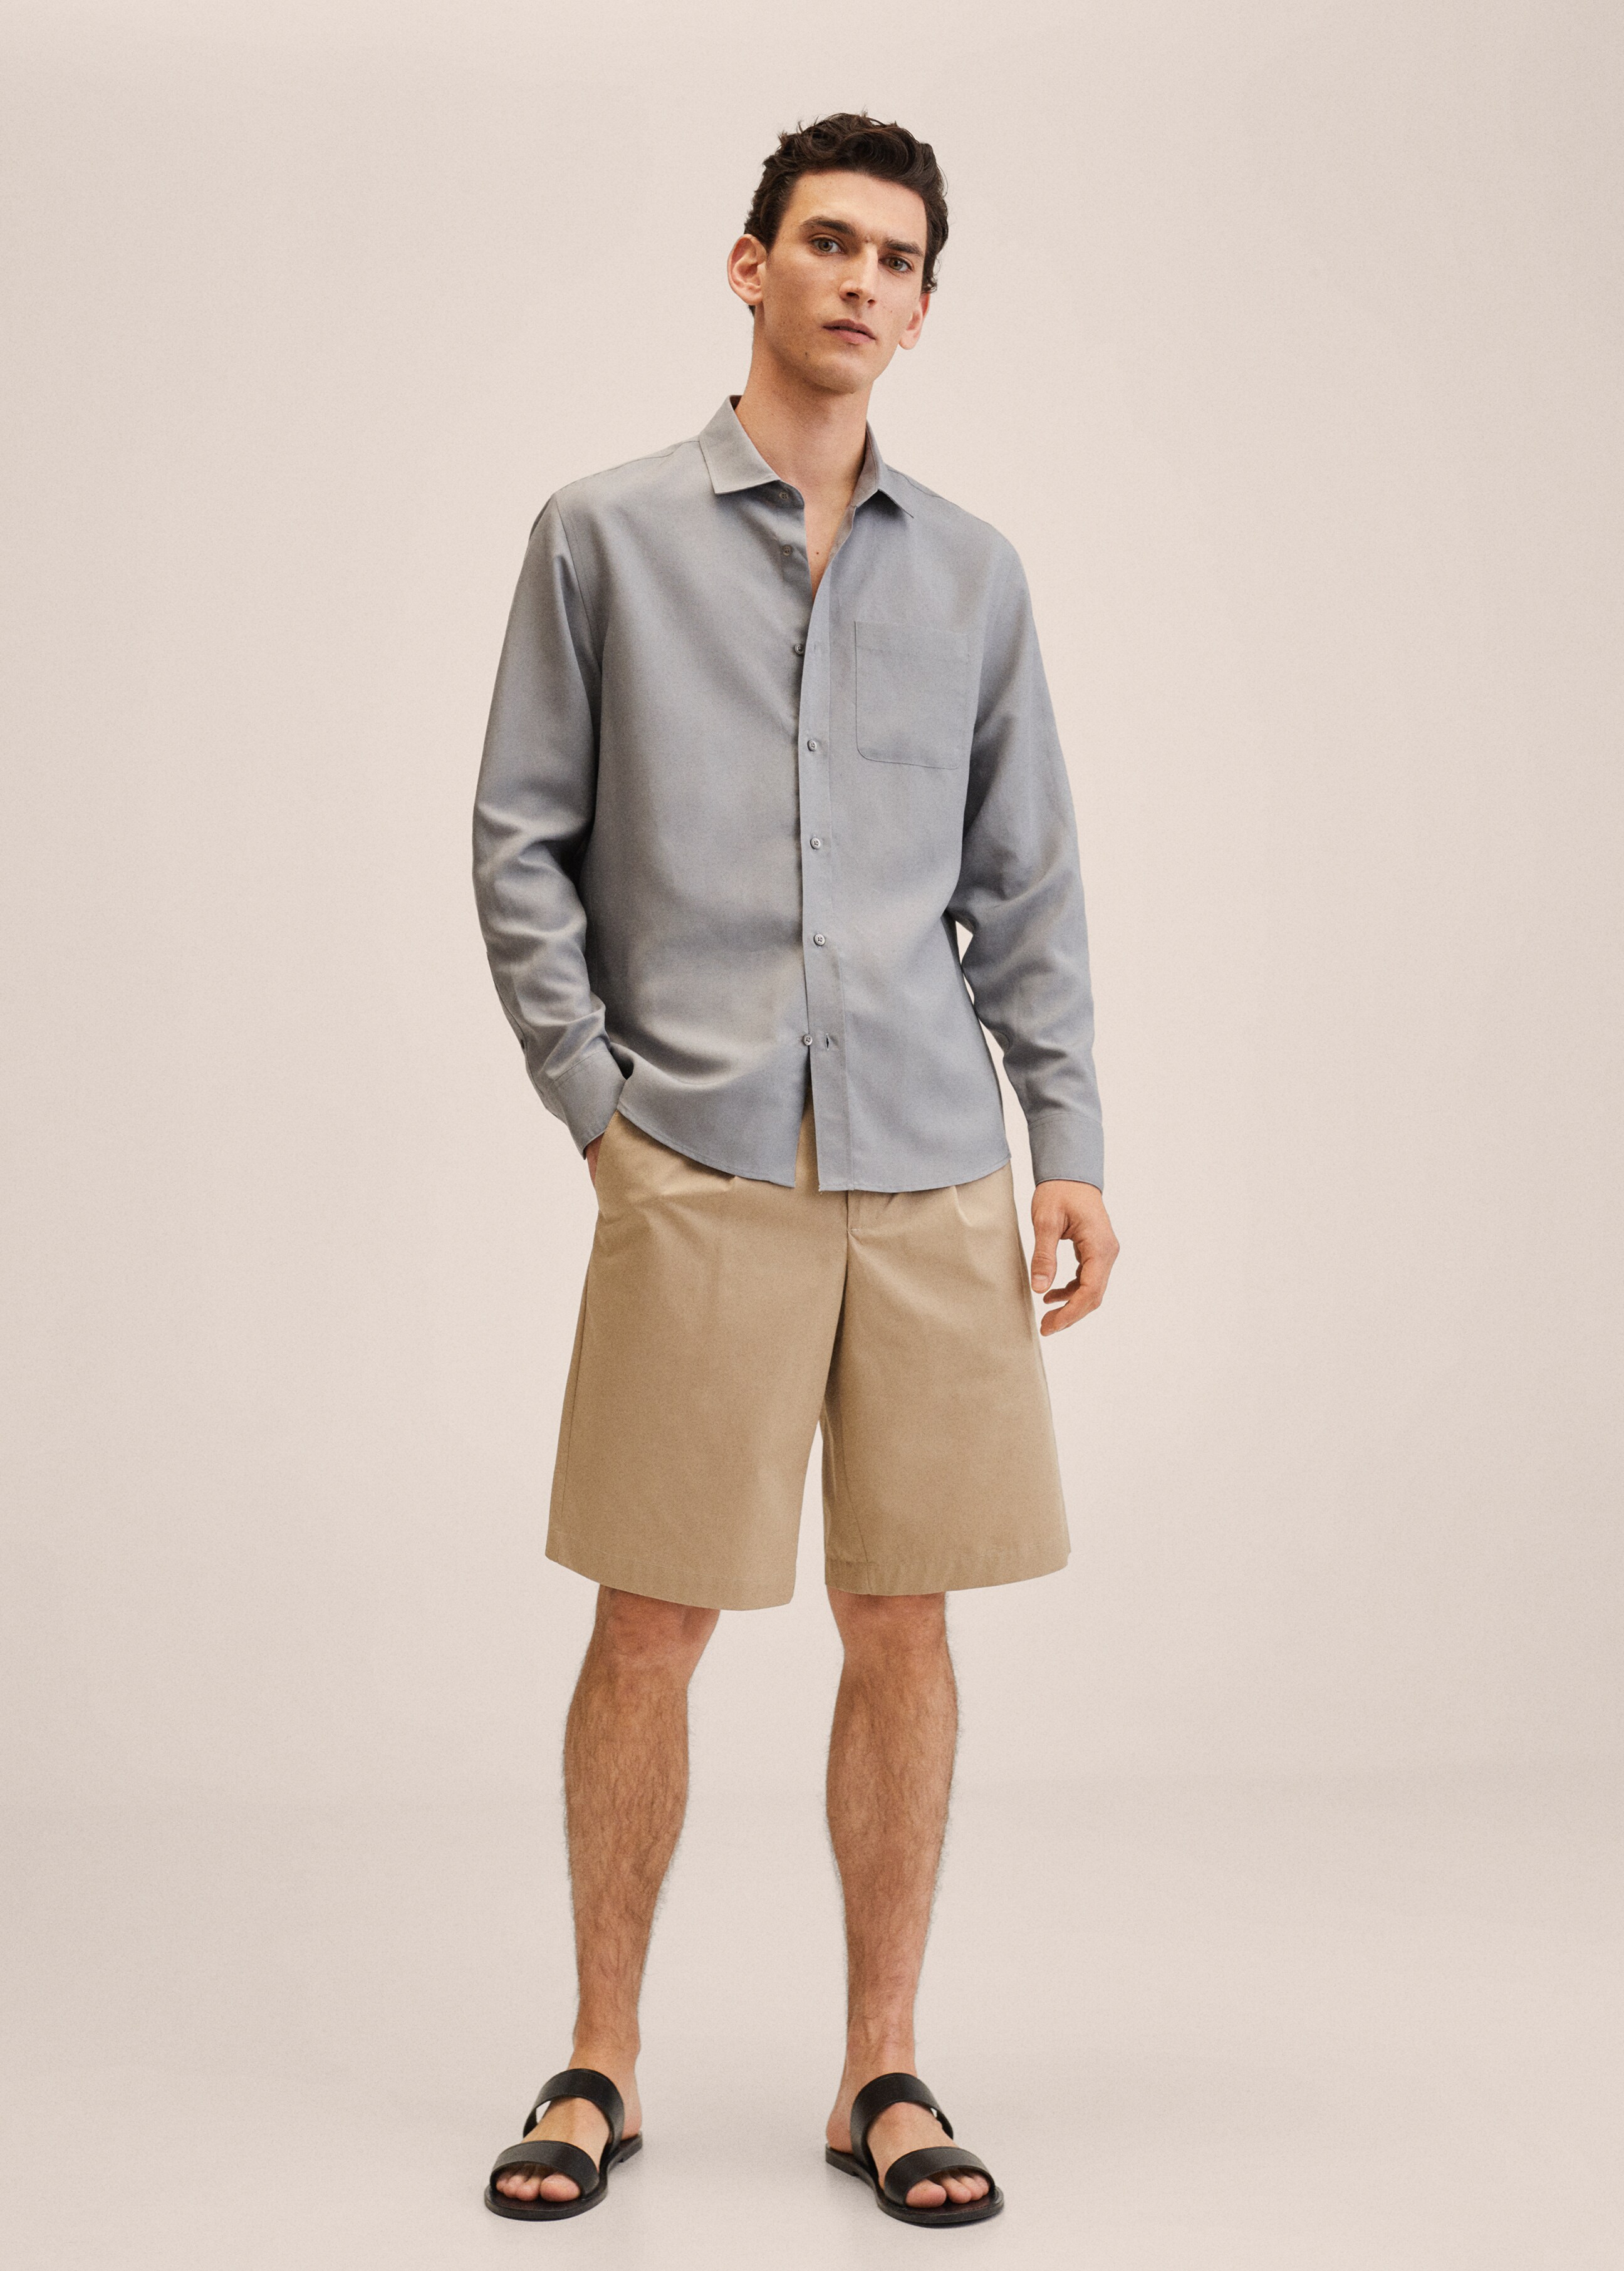 Linen lyocell shirt with pocket - General plane